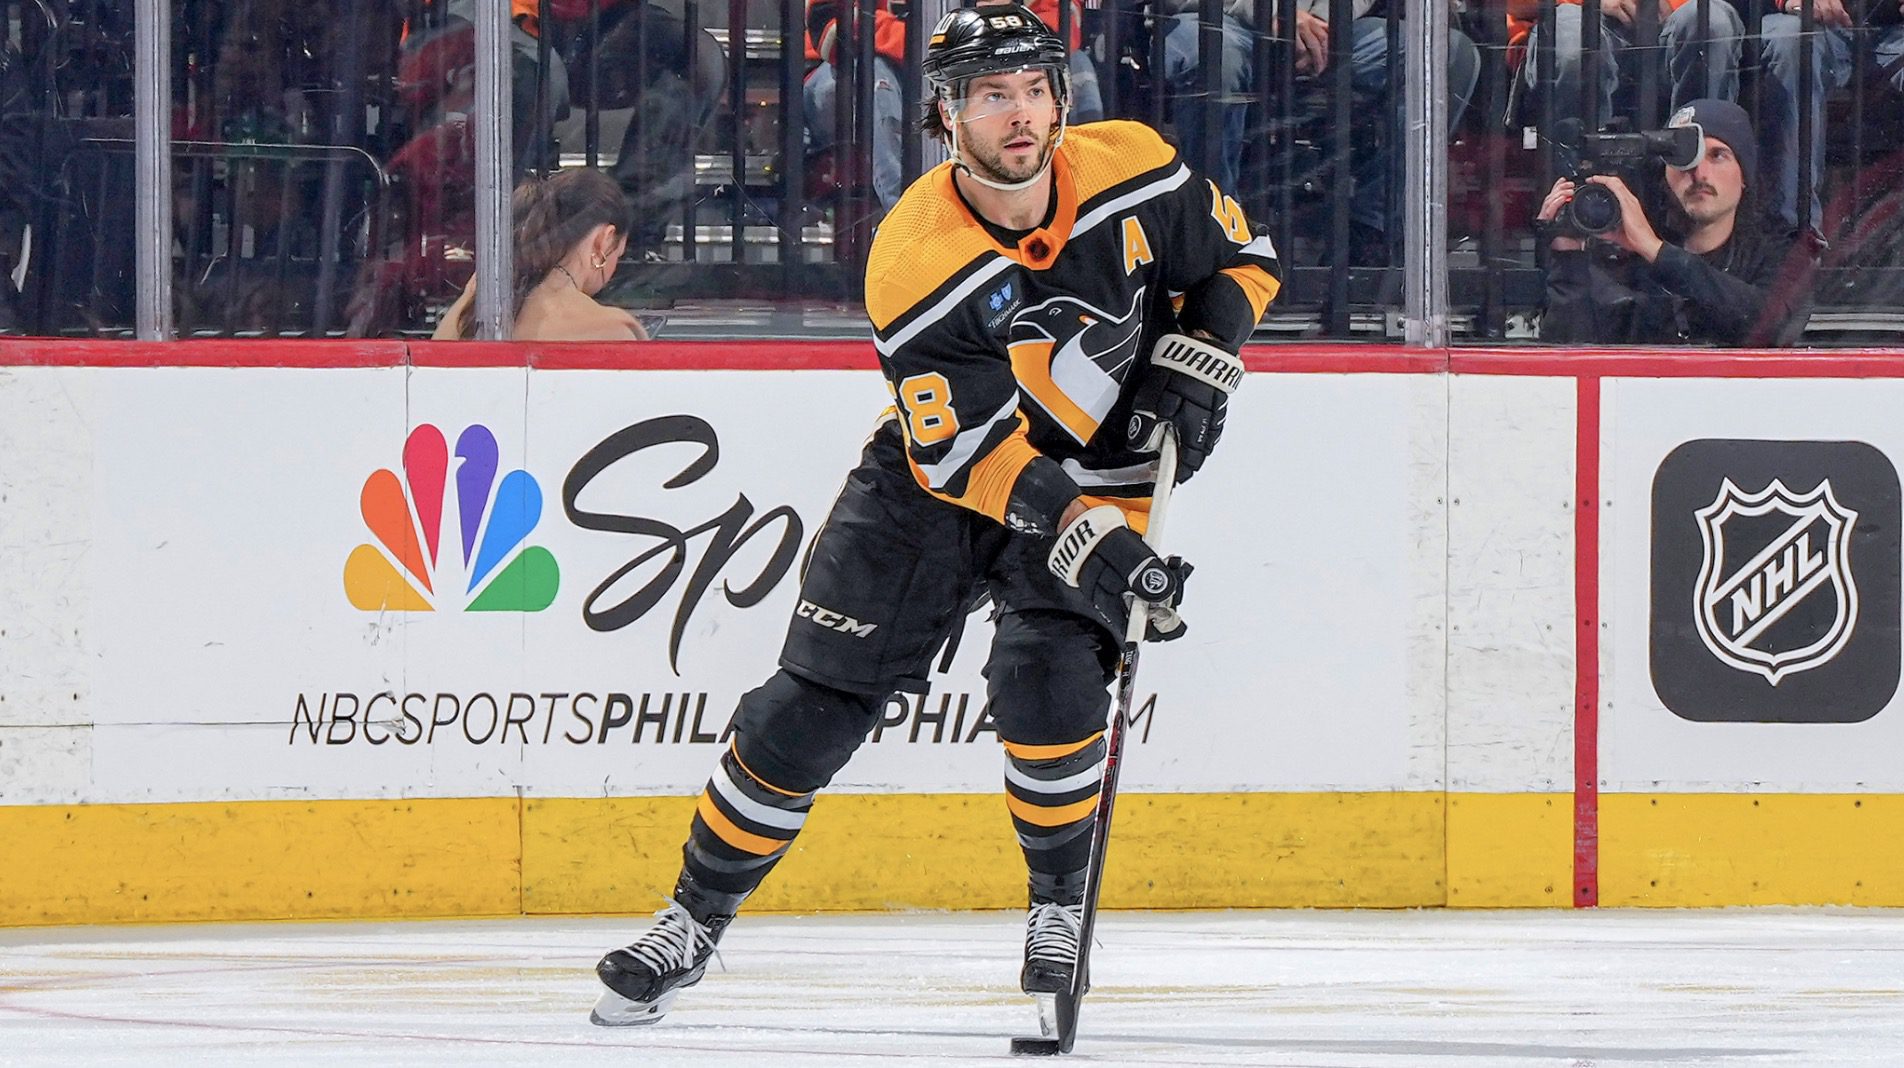 35-Year-Old Pittsburgh Penguins Defenseman Kris Letang Out Indefinitely After suffering Stroke